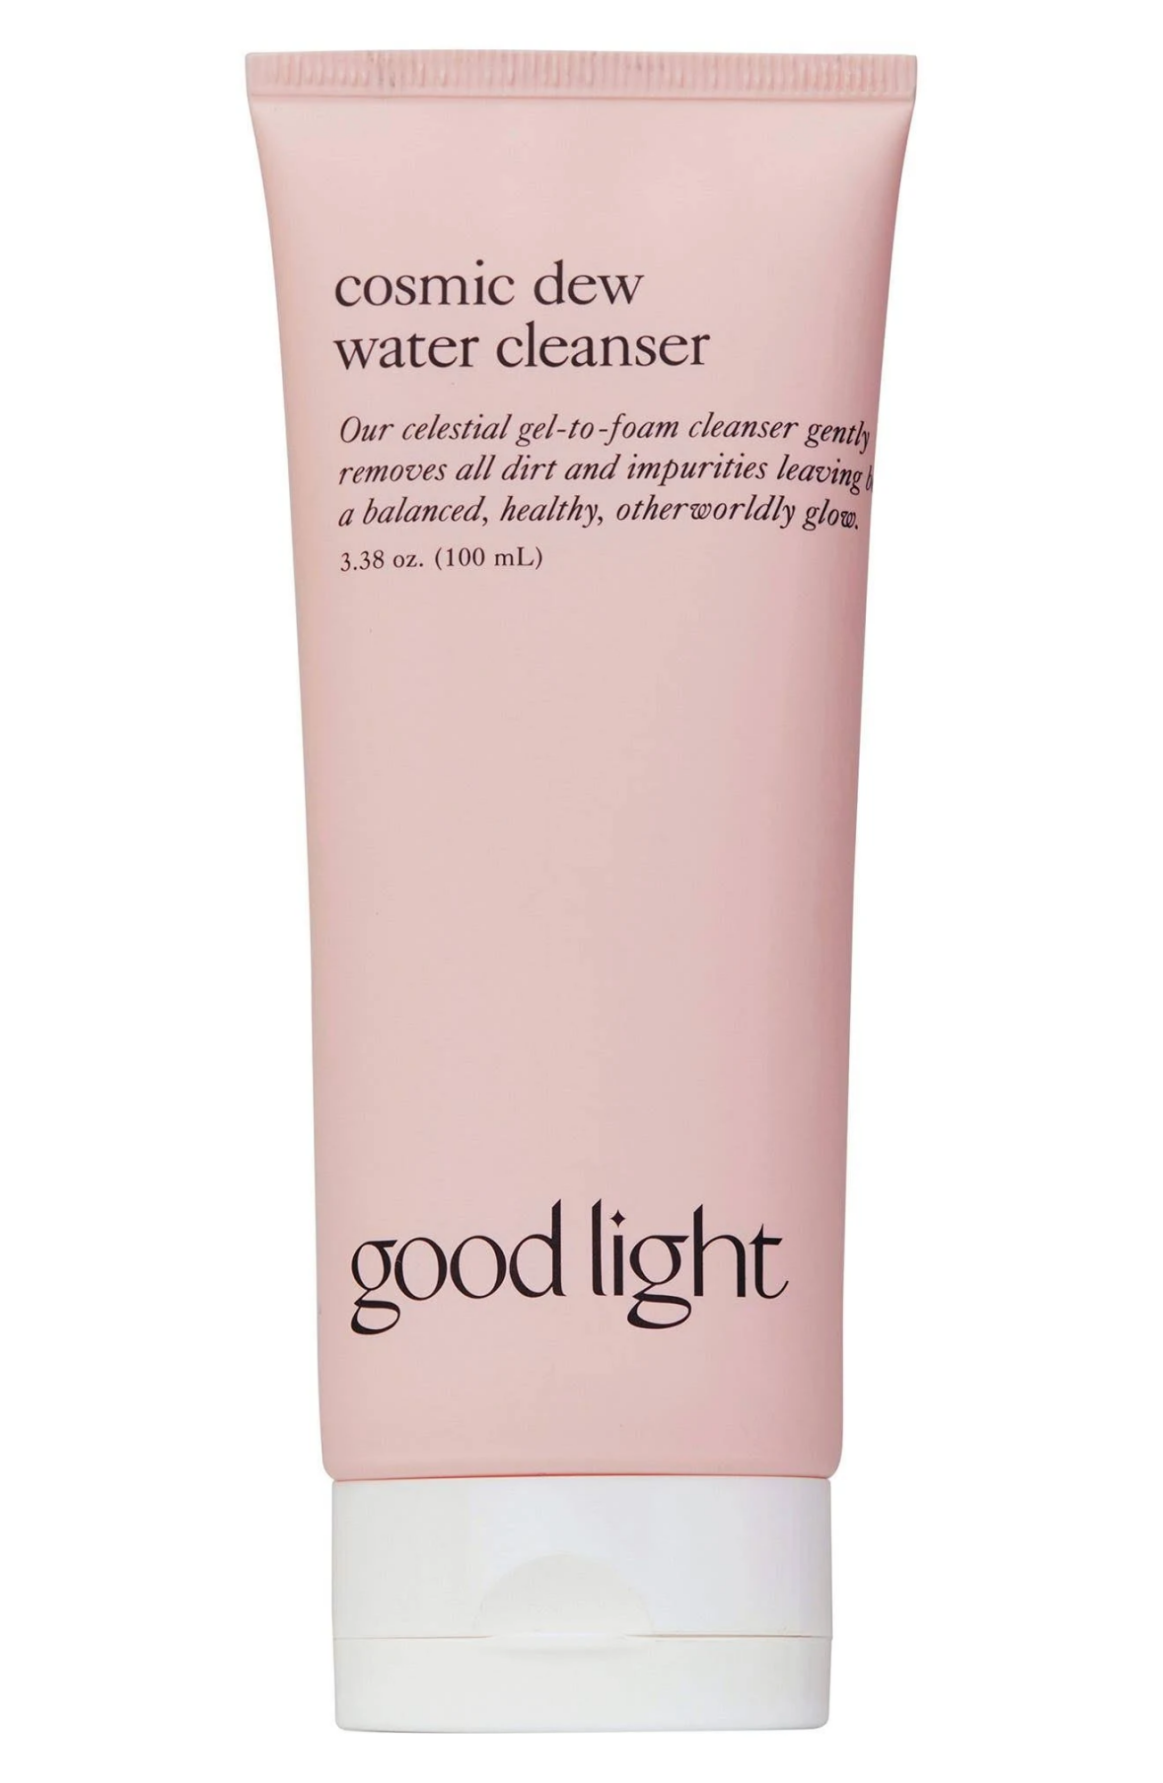 Best Face Washes for Dry Skin - Good light